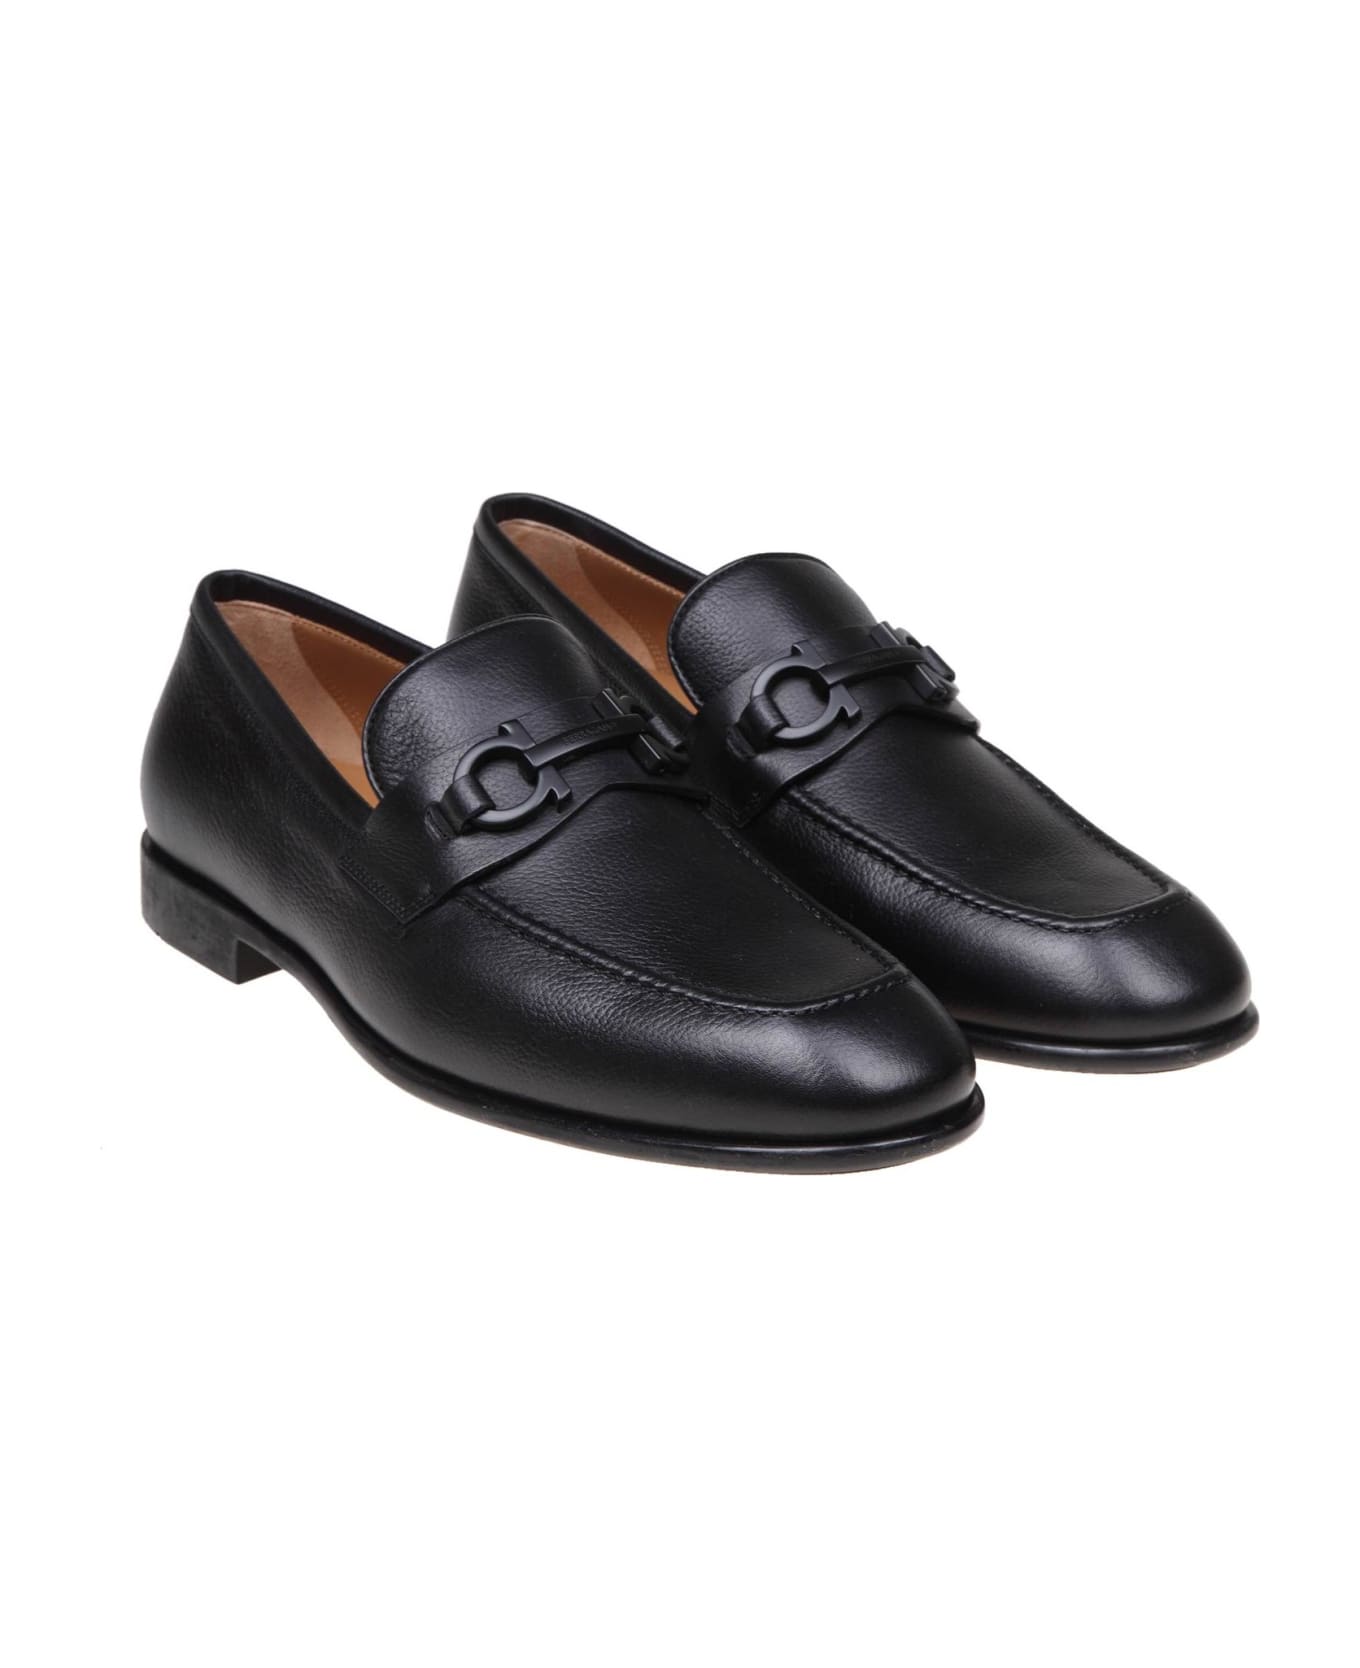 Ferragamo Leather Loafers With Gancini Buckle - Black